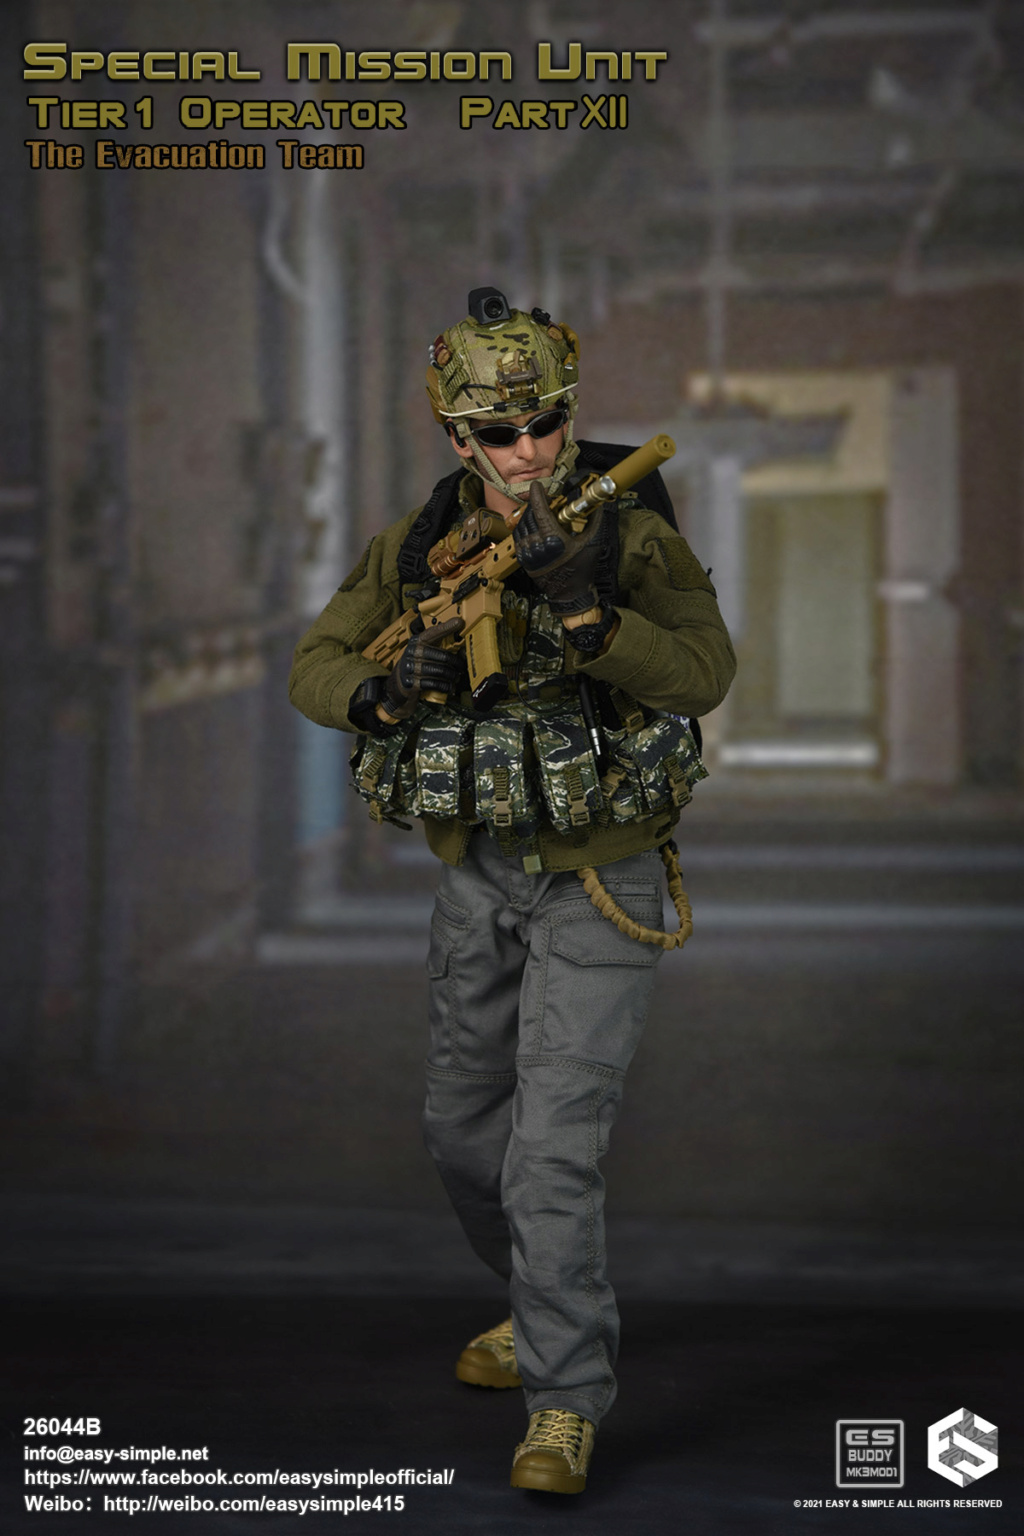 SpecialMissionUnit - NEW PRODUCT: Easy&Simple: 26044B Special Mission Unit Tier1 Operator Part XII The Evacuation Team 940a2210